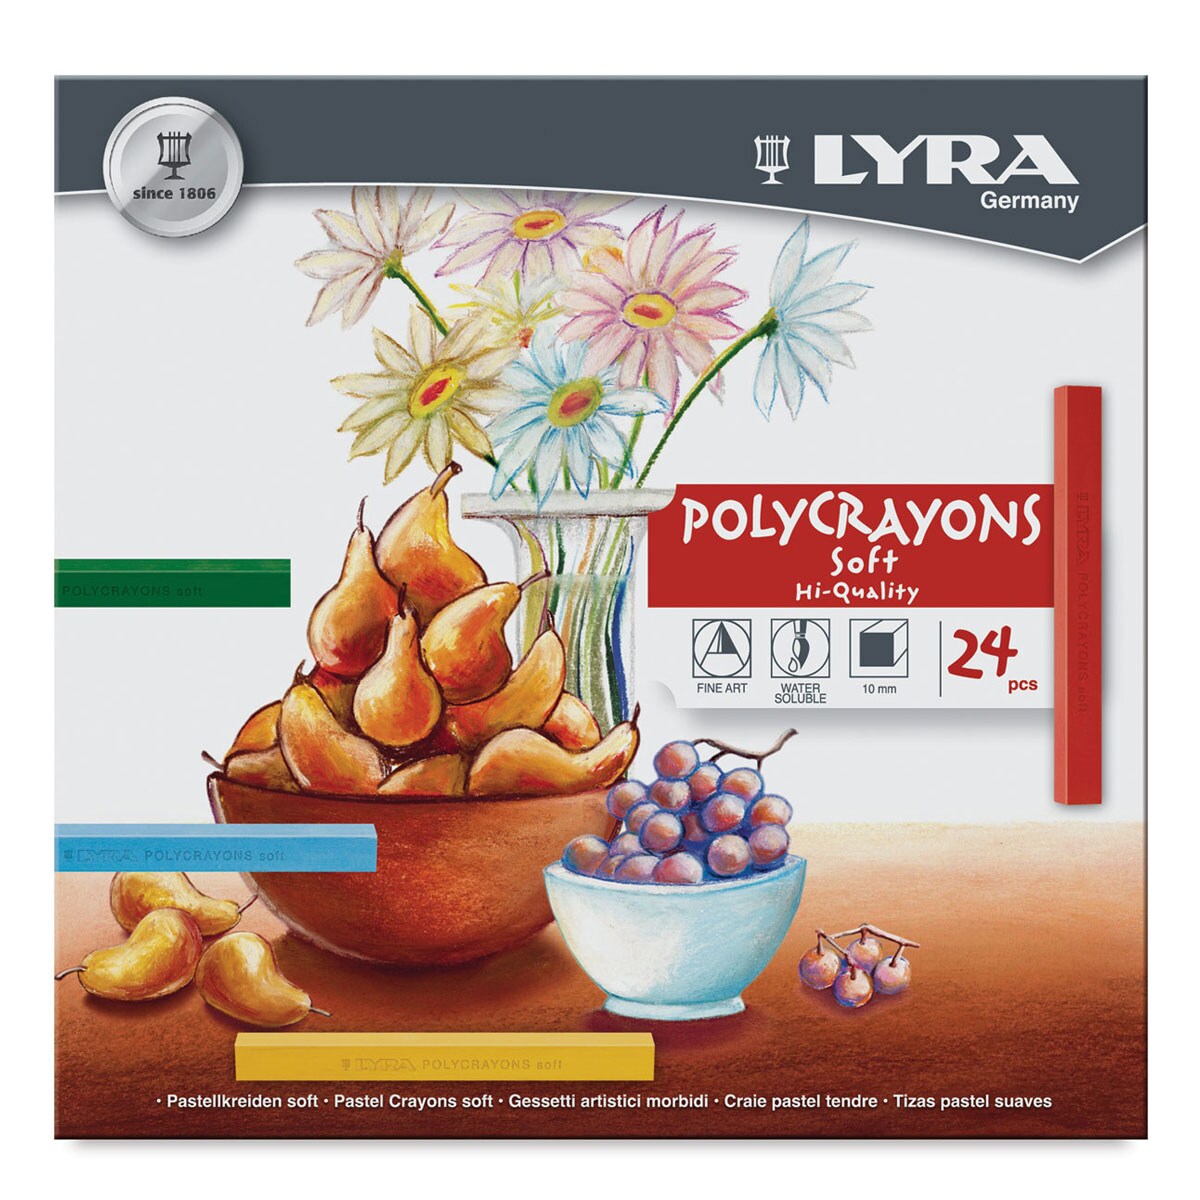 Lyra Polycrayons Soft Pastel - Assorted Colors, Set of 24